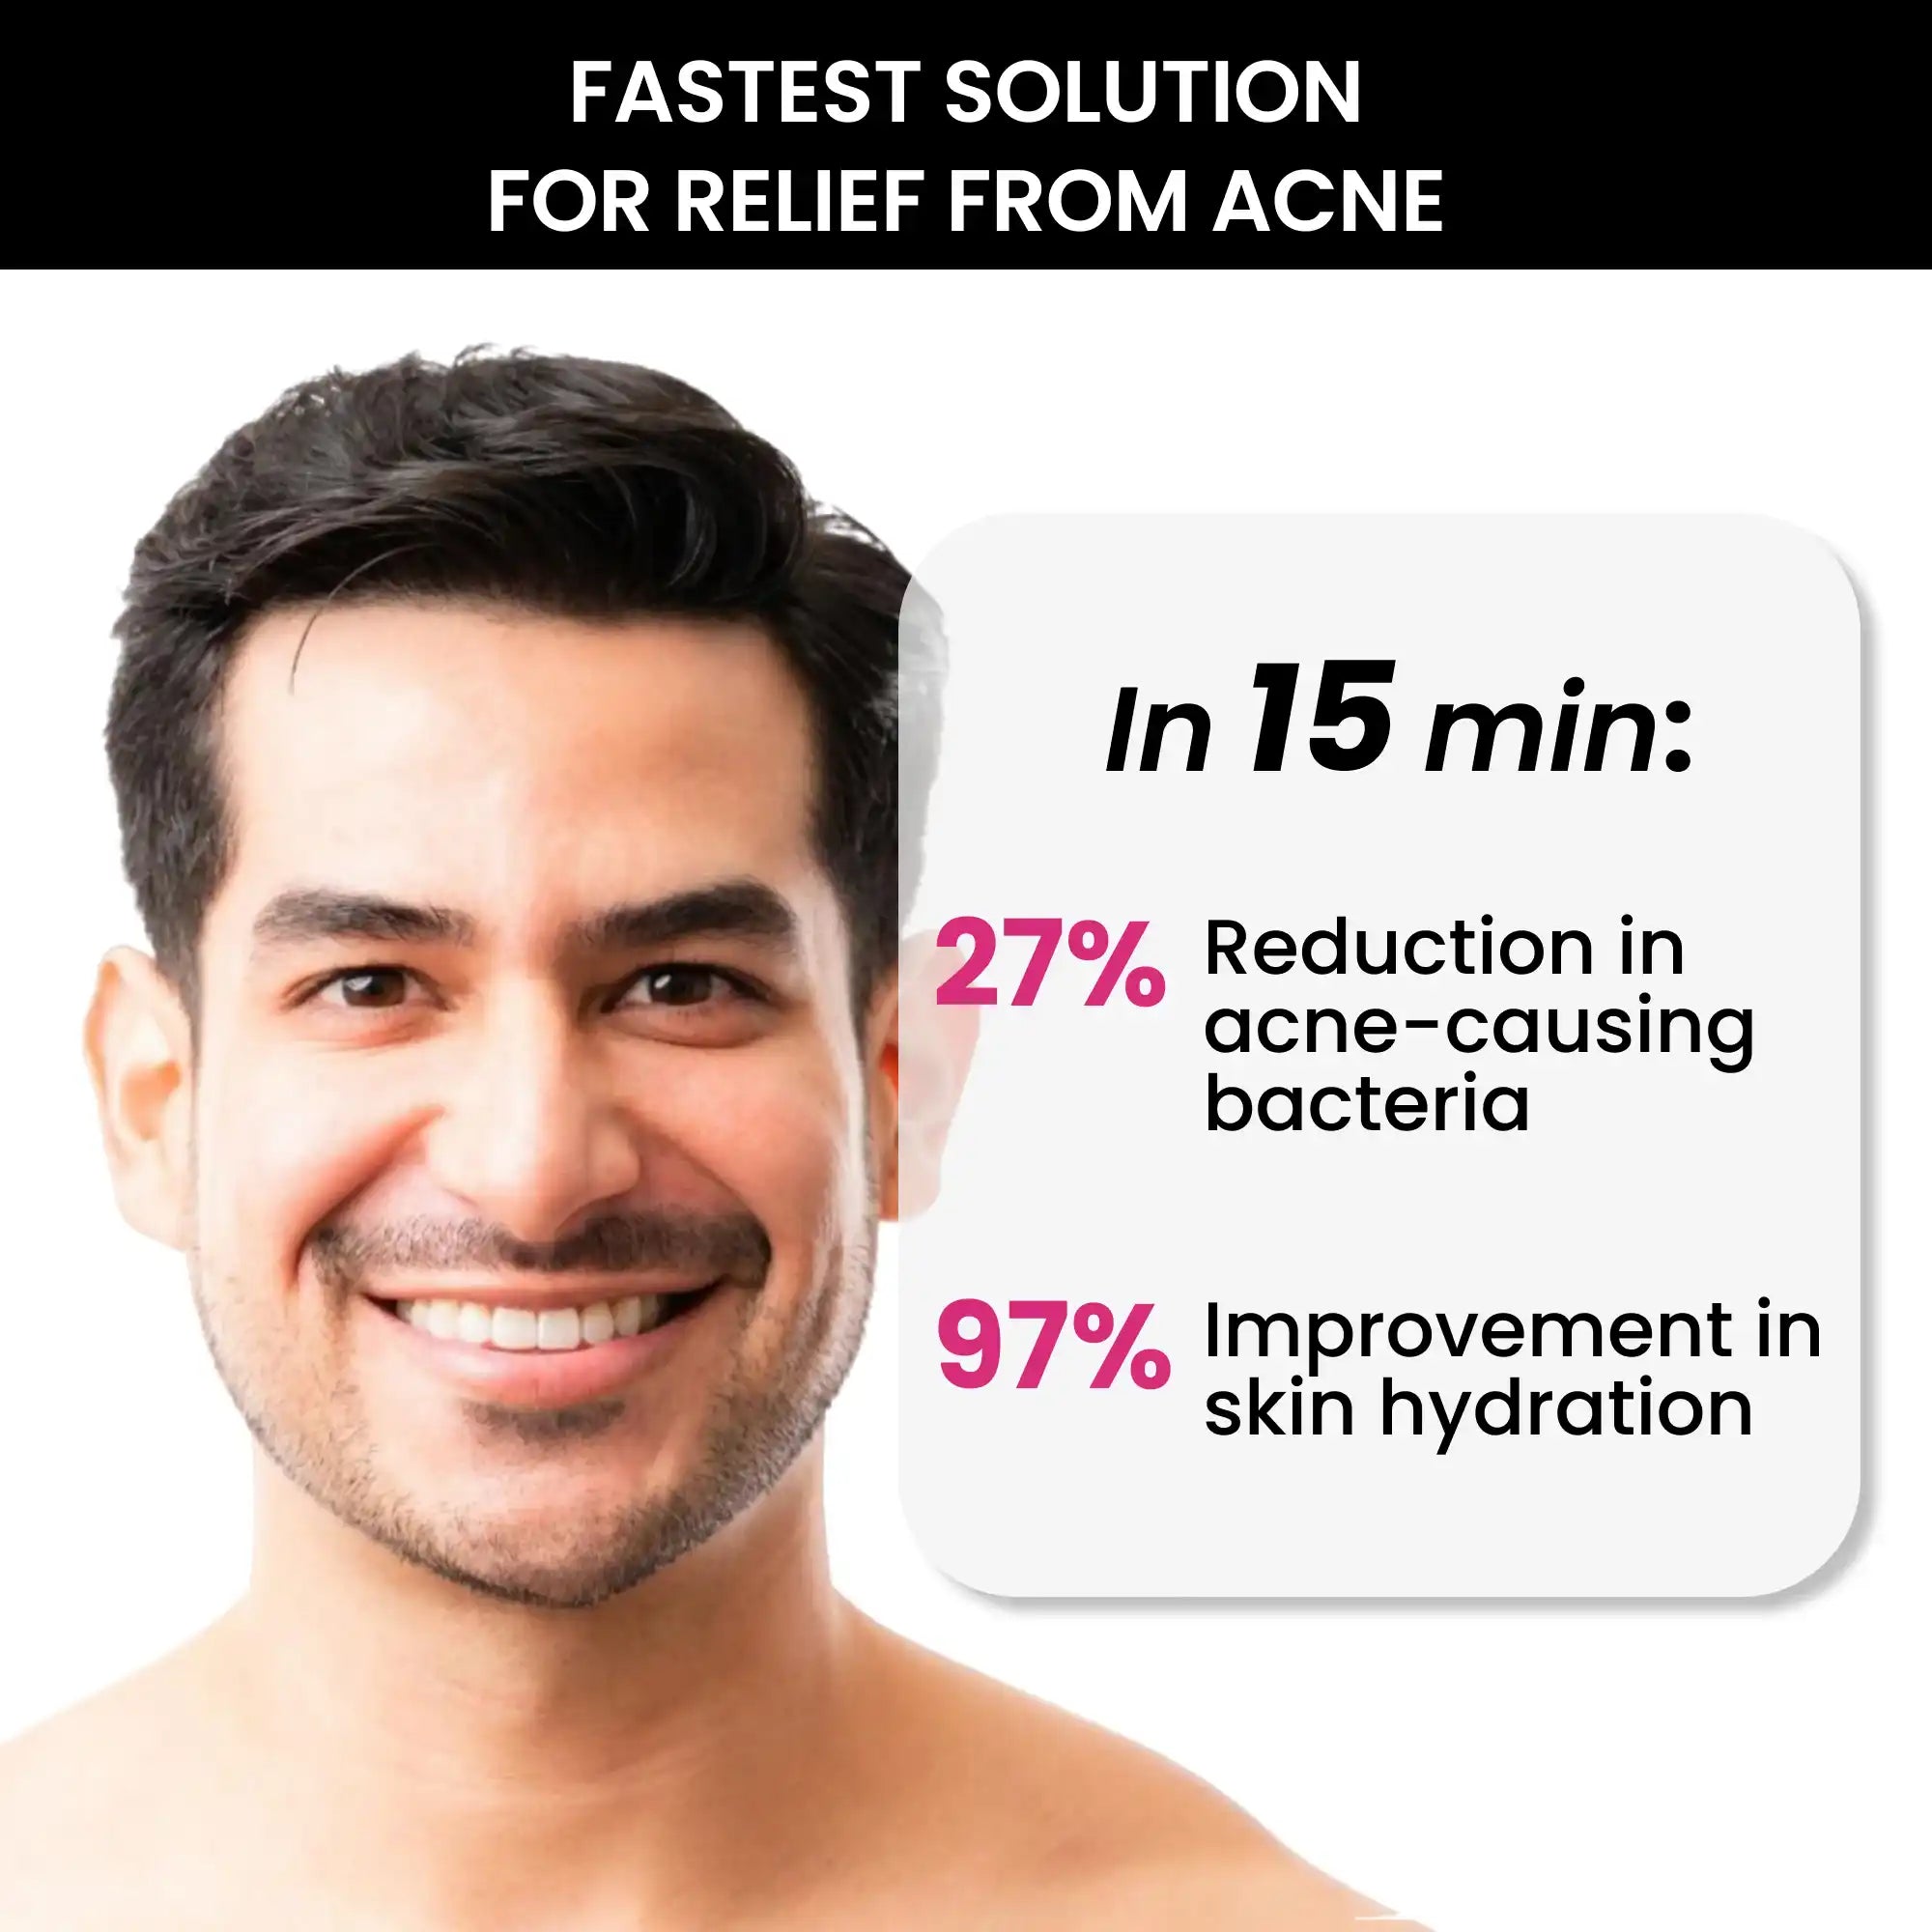 ThriveCo Goodbye Acne Kit for men is the fastest solution for acne relief